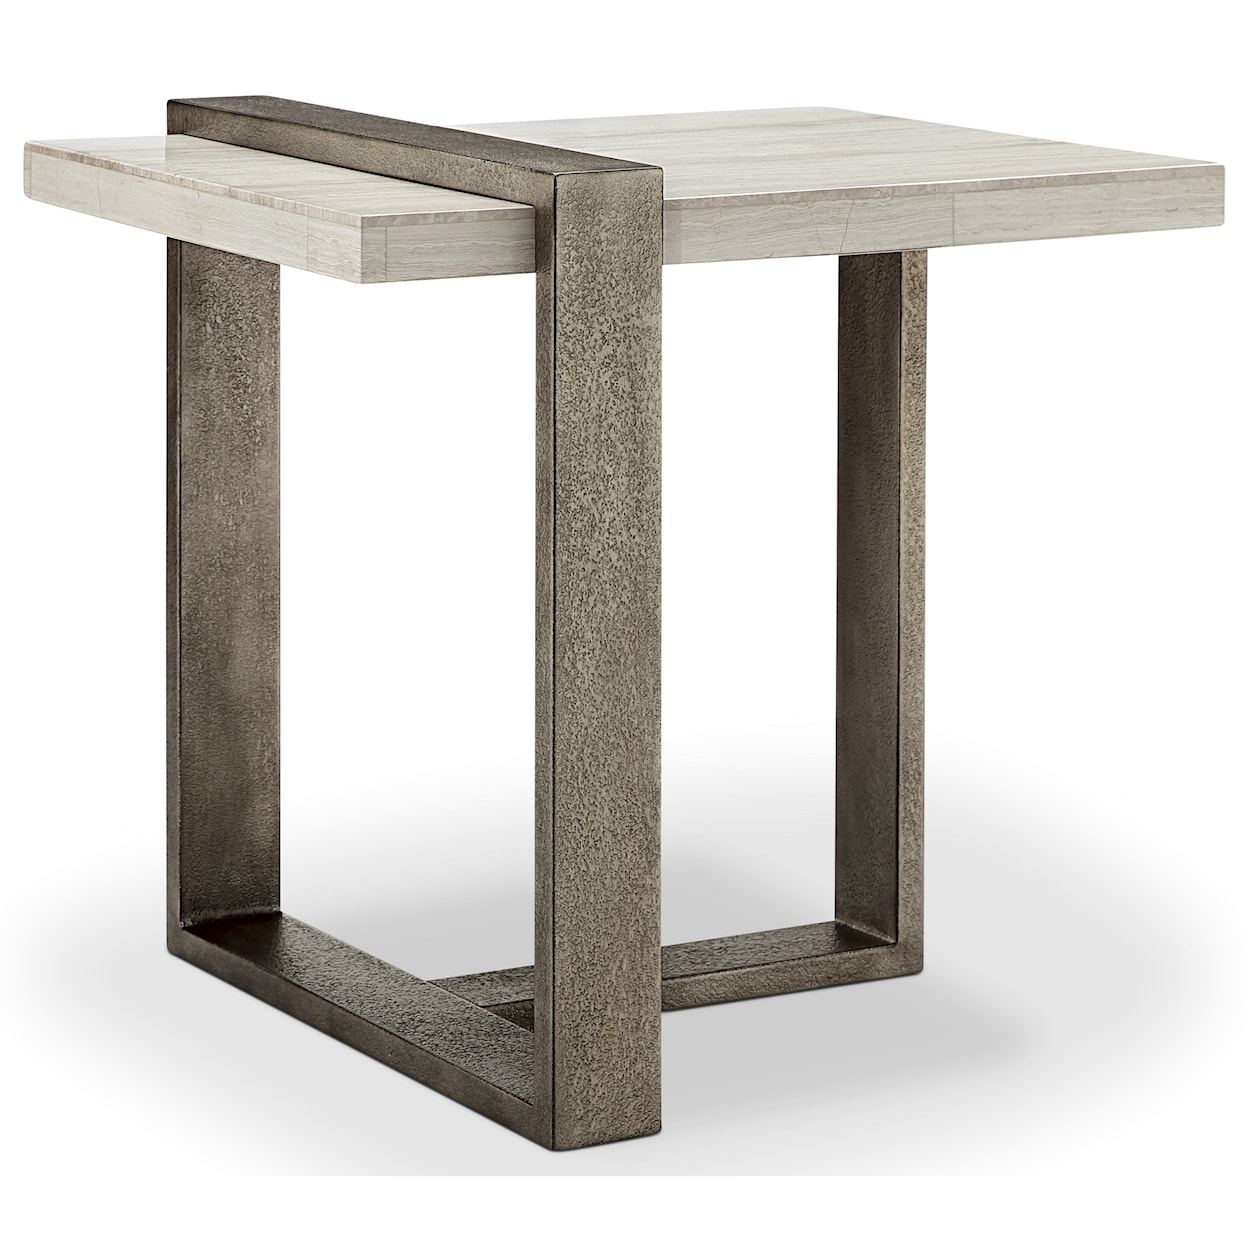 Magnussen Home Wiltshire Occasional Tables Rectangular End Table